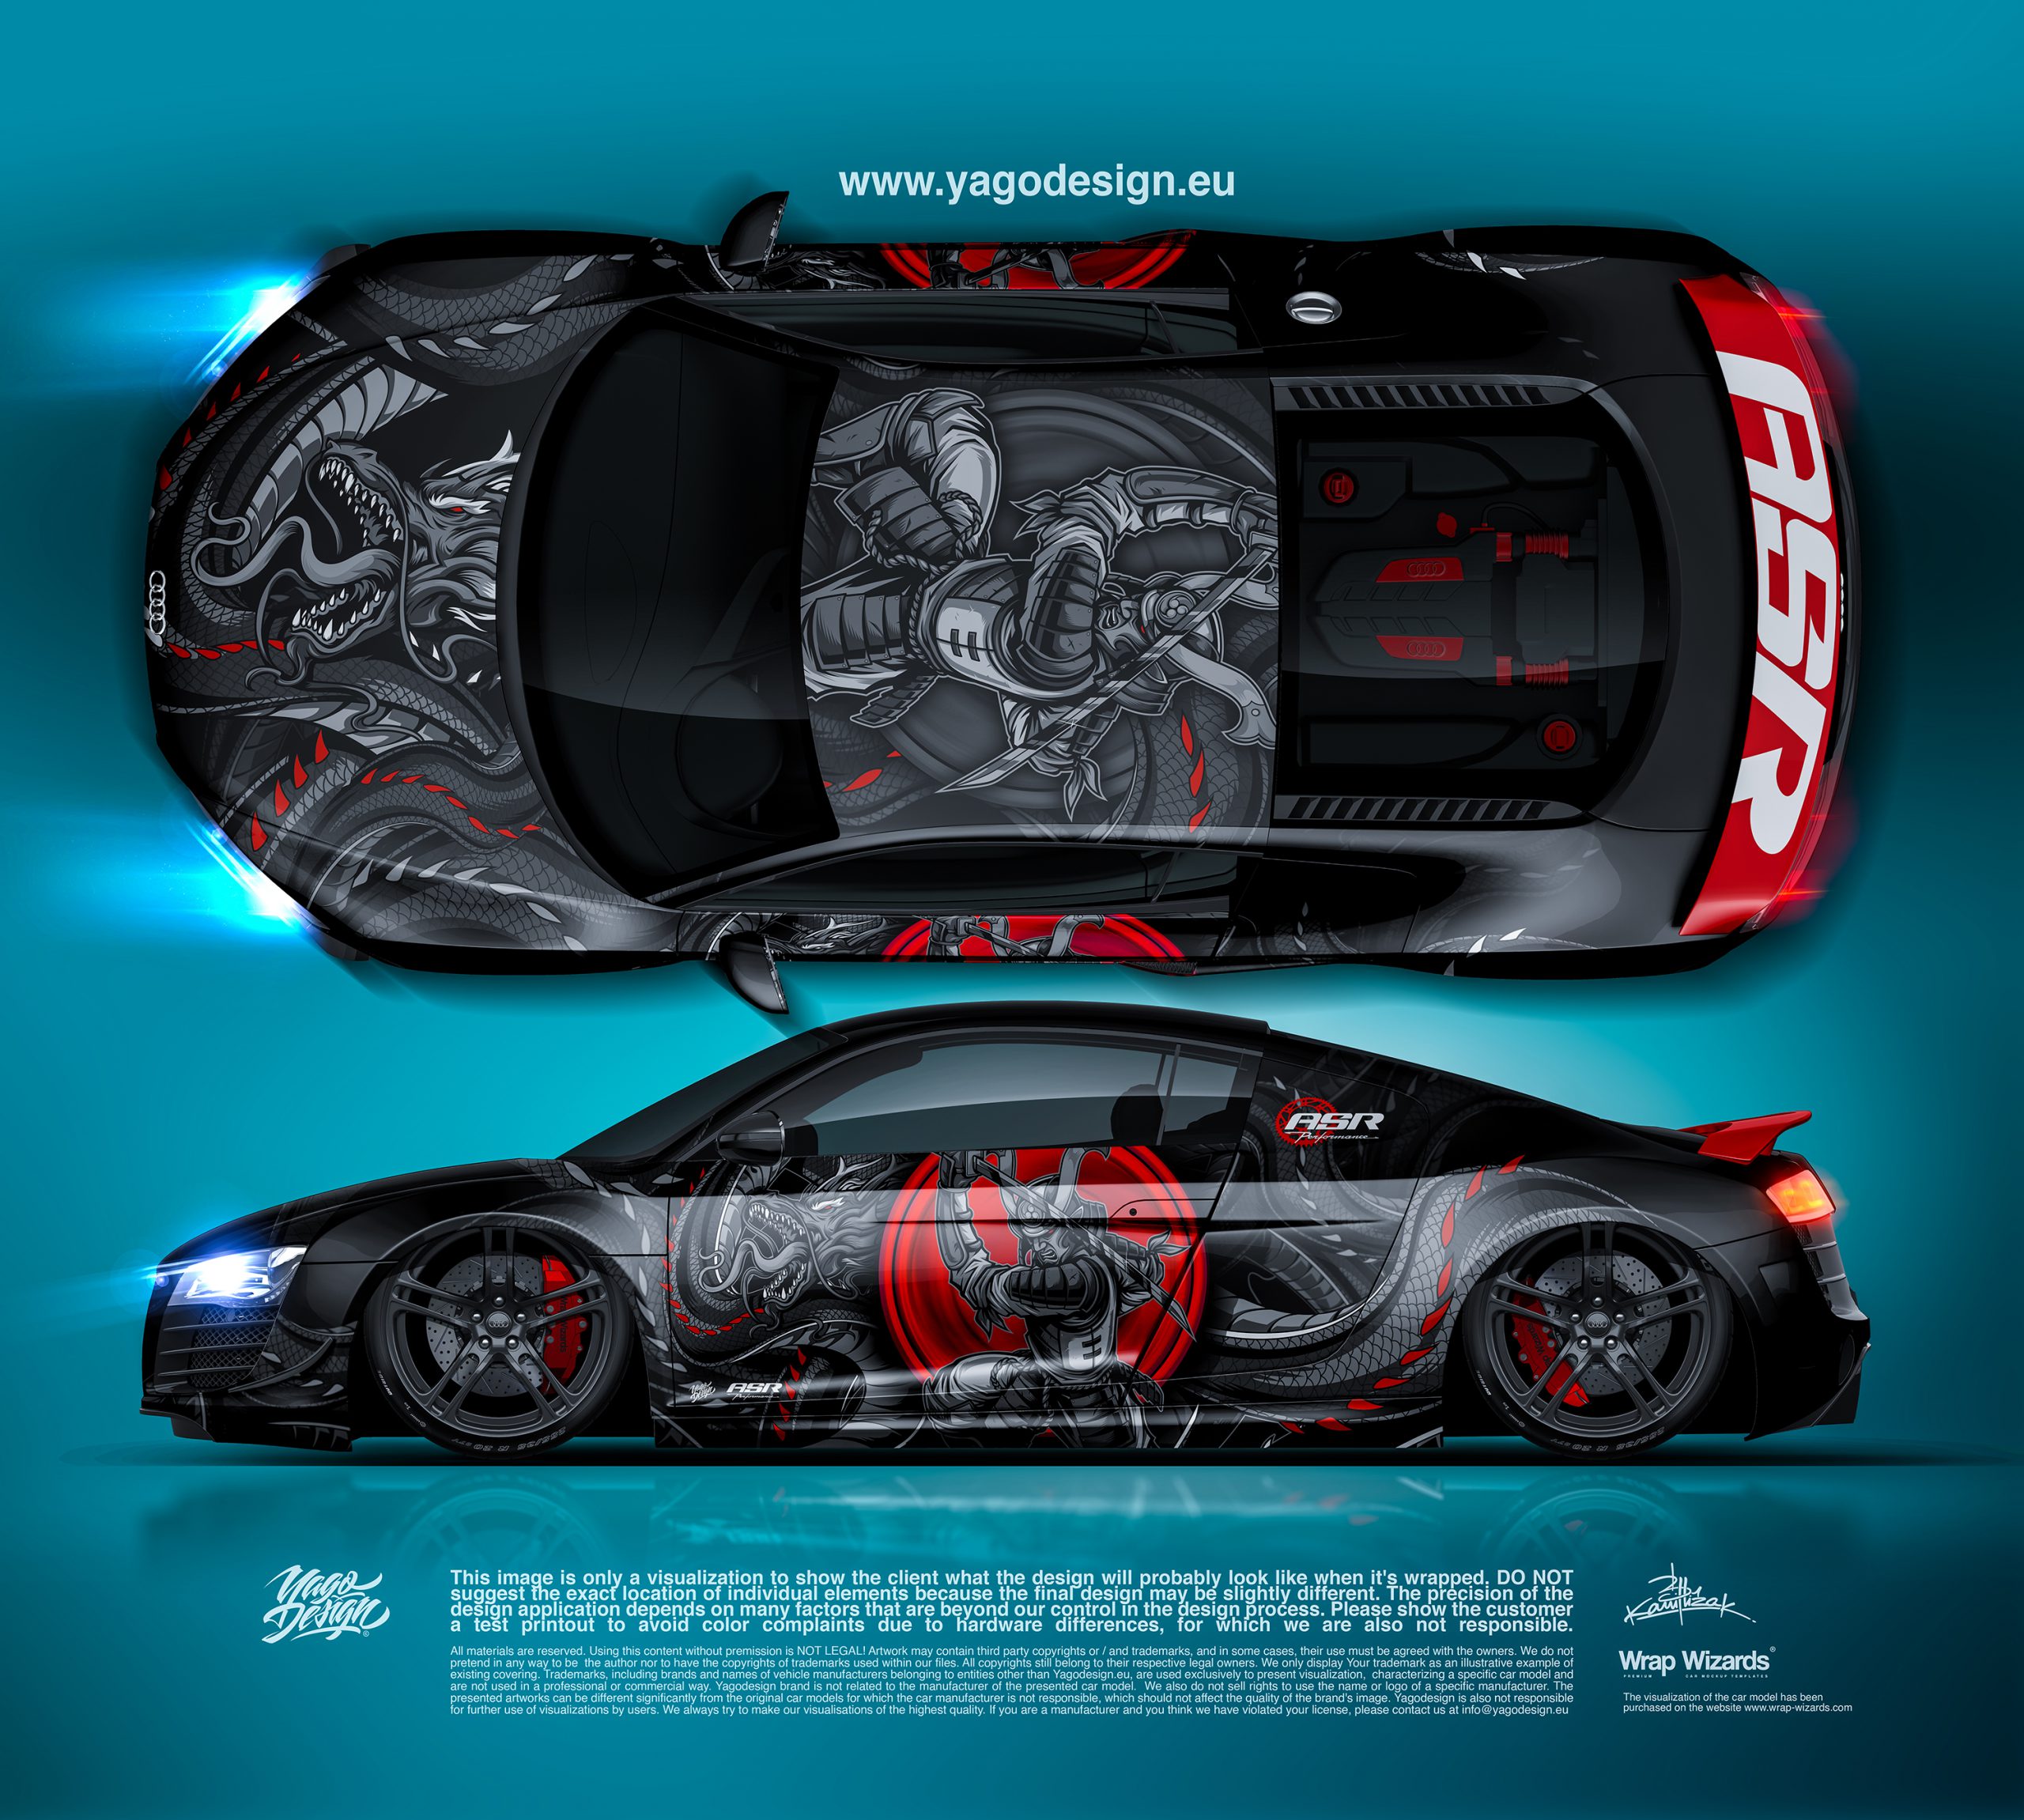 RONIN-DESING-ON-AUDI-R8-BY-YAGODESIGN-red-3000-